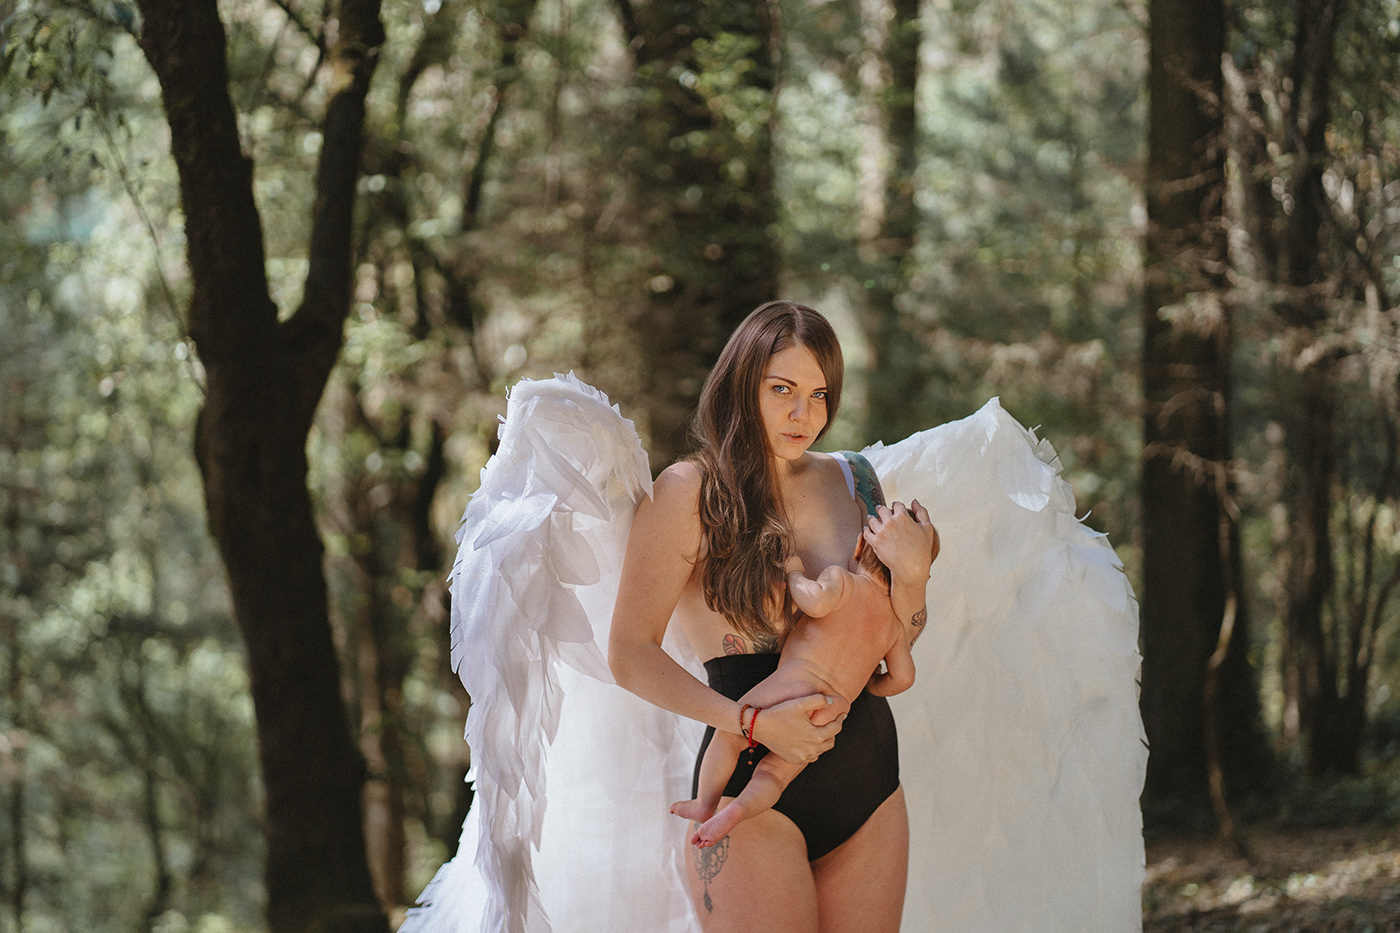 angel beauty maternity Nature newborn photography Outdoor Photography  portrait wings woman